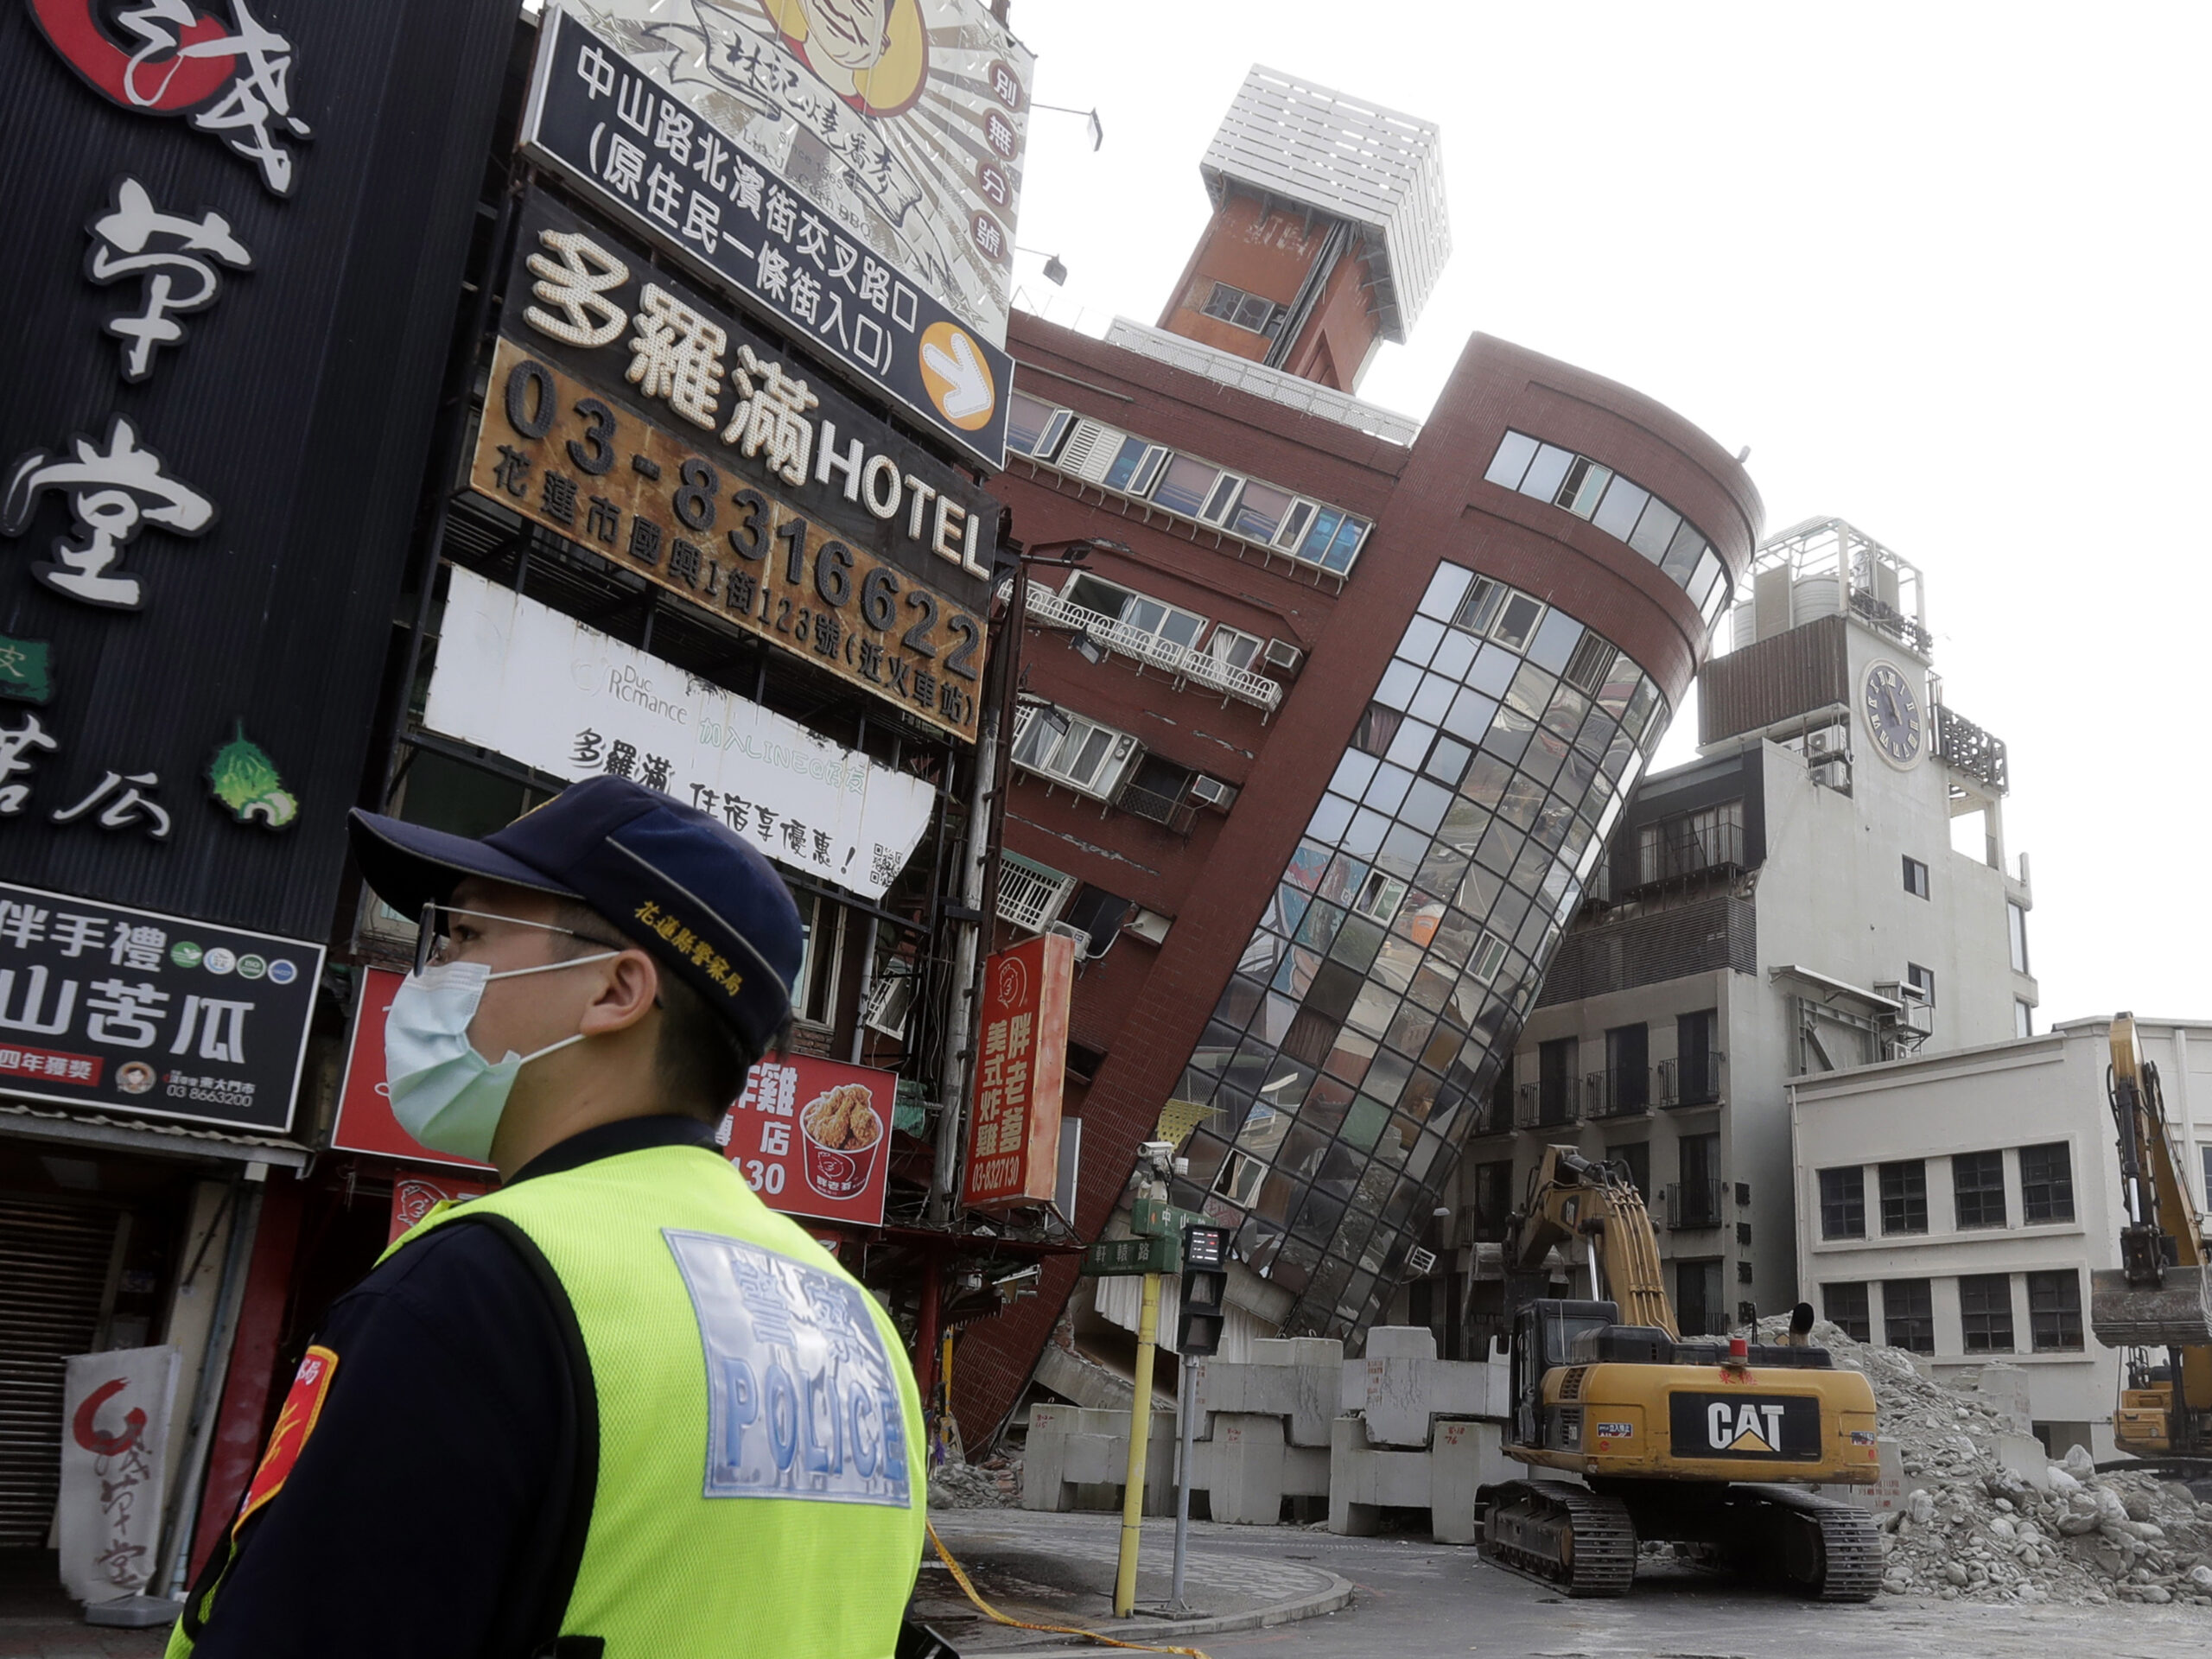 Taiwan emerges remarkably unscathed after massive earthquake